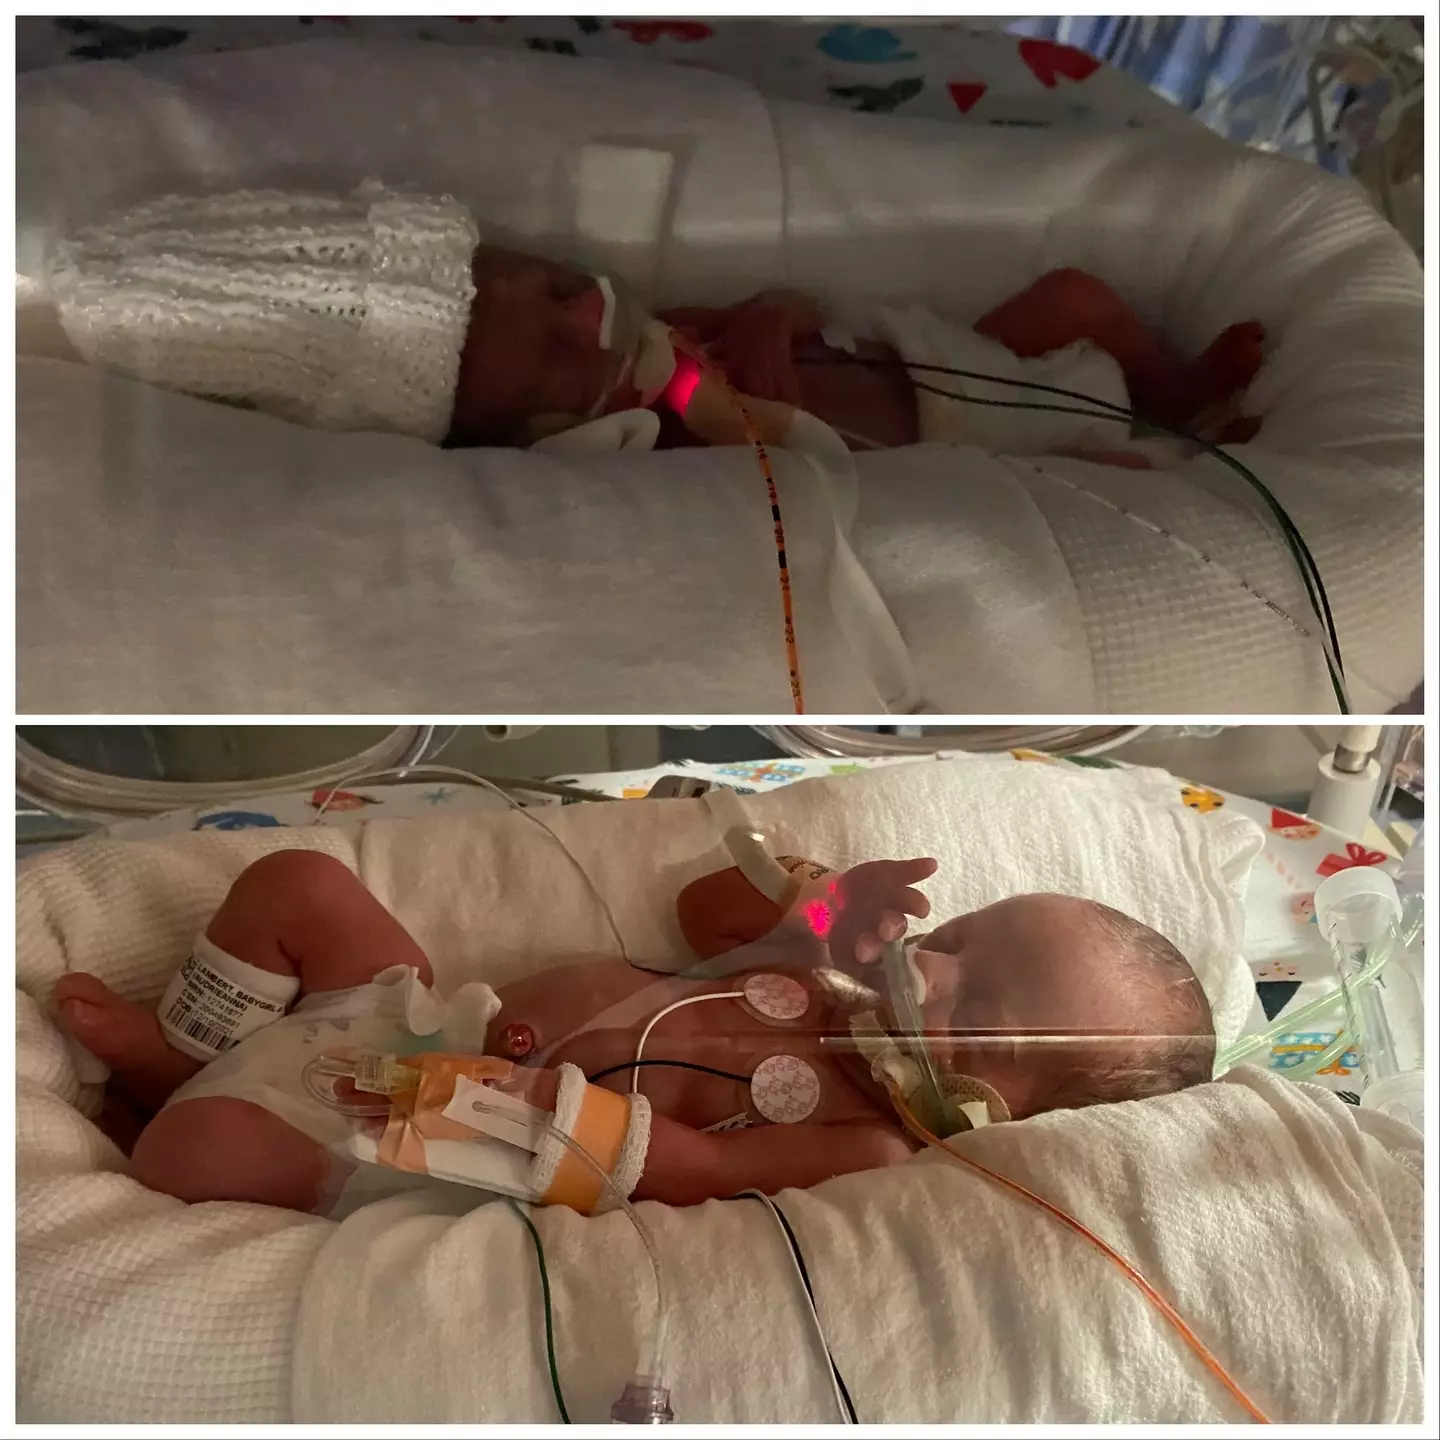 Both twins were born 11 weeks early.